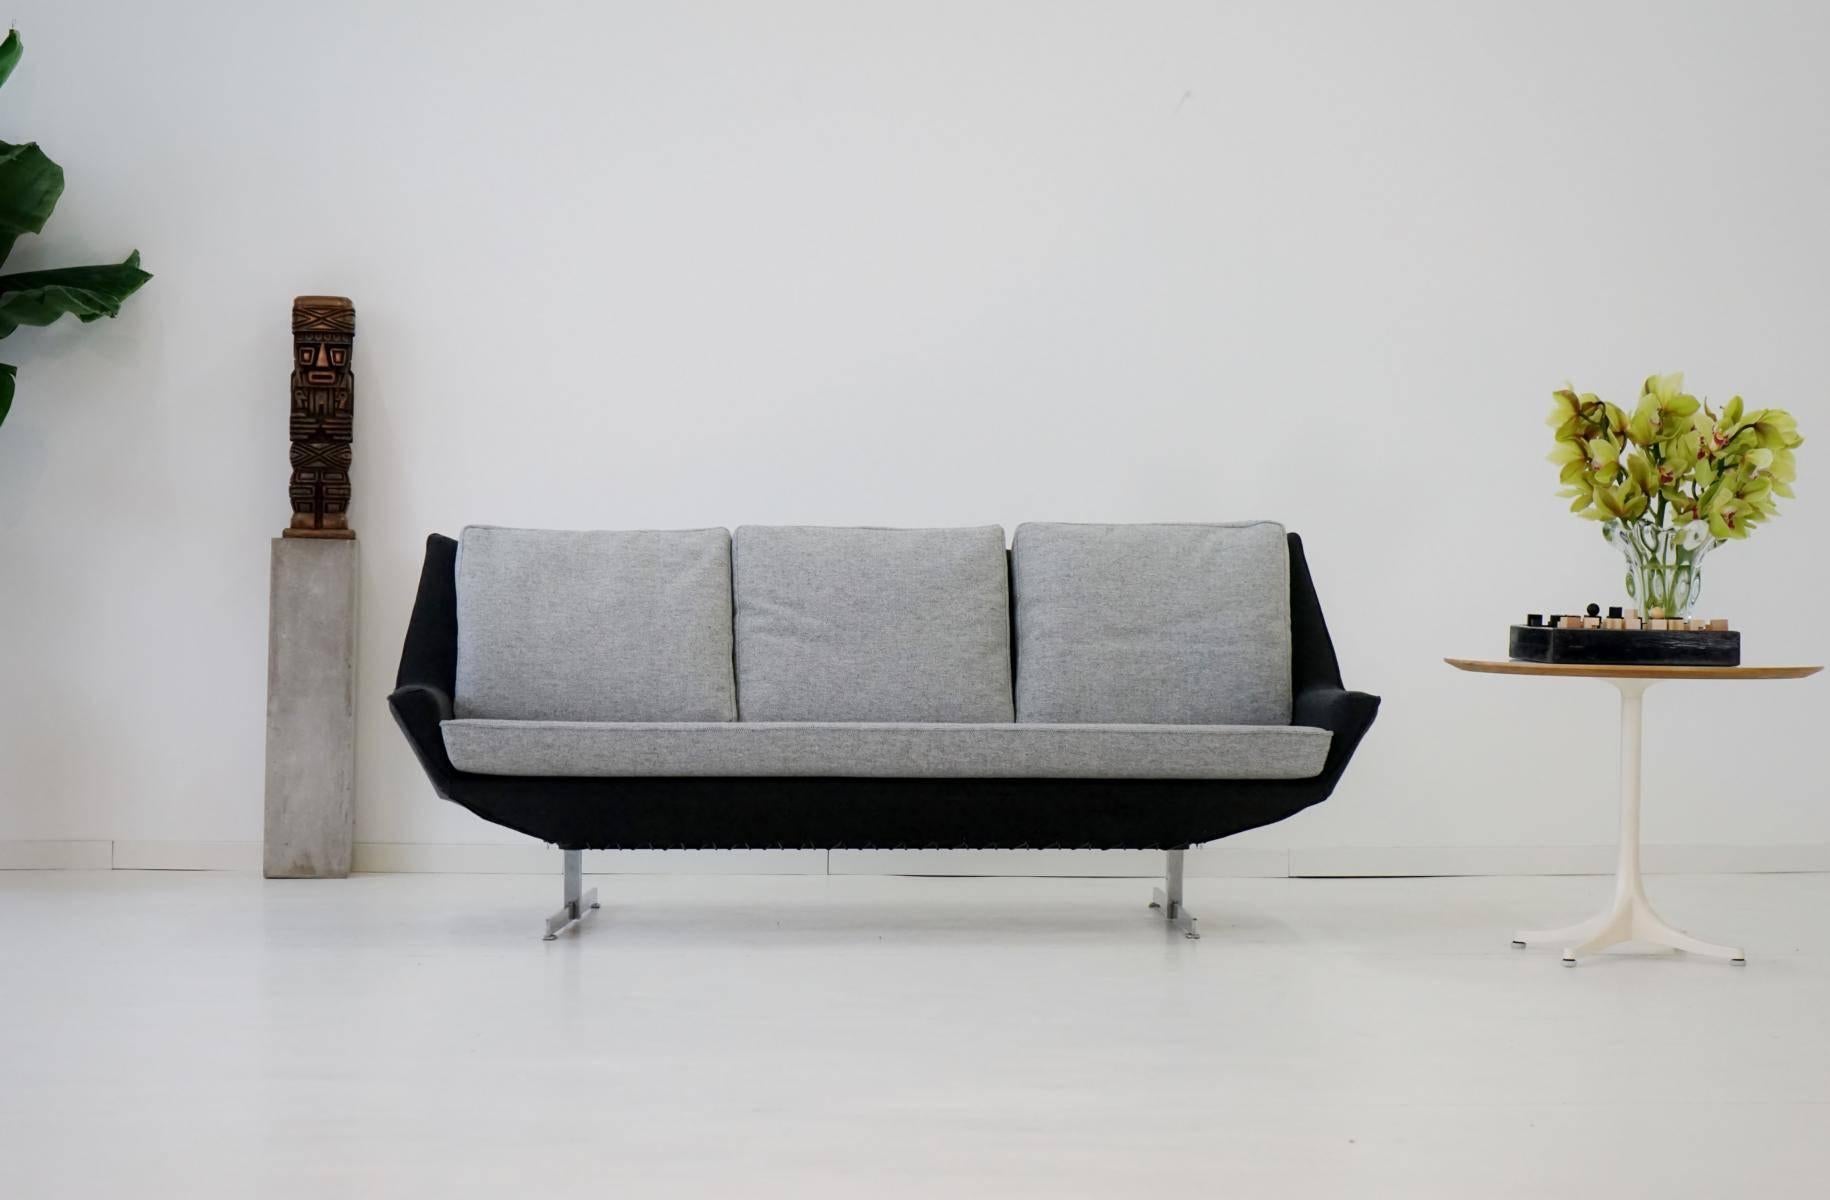 1950s Three-Seat Sofa by Knoll Midcentury Hallingdal Canapé Couch (Deutsch)